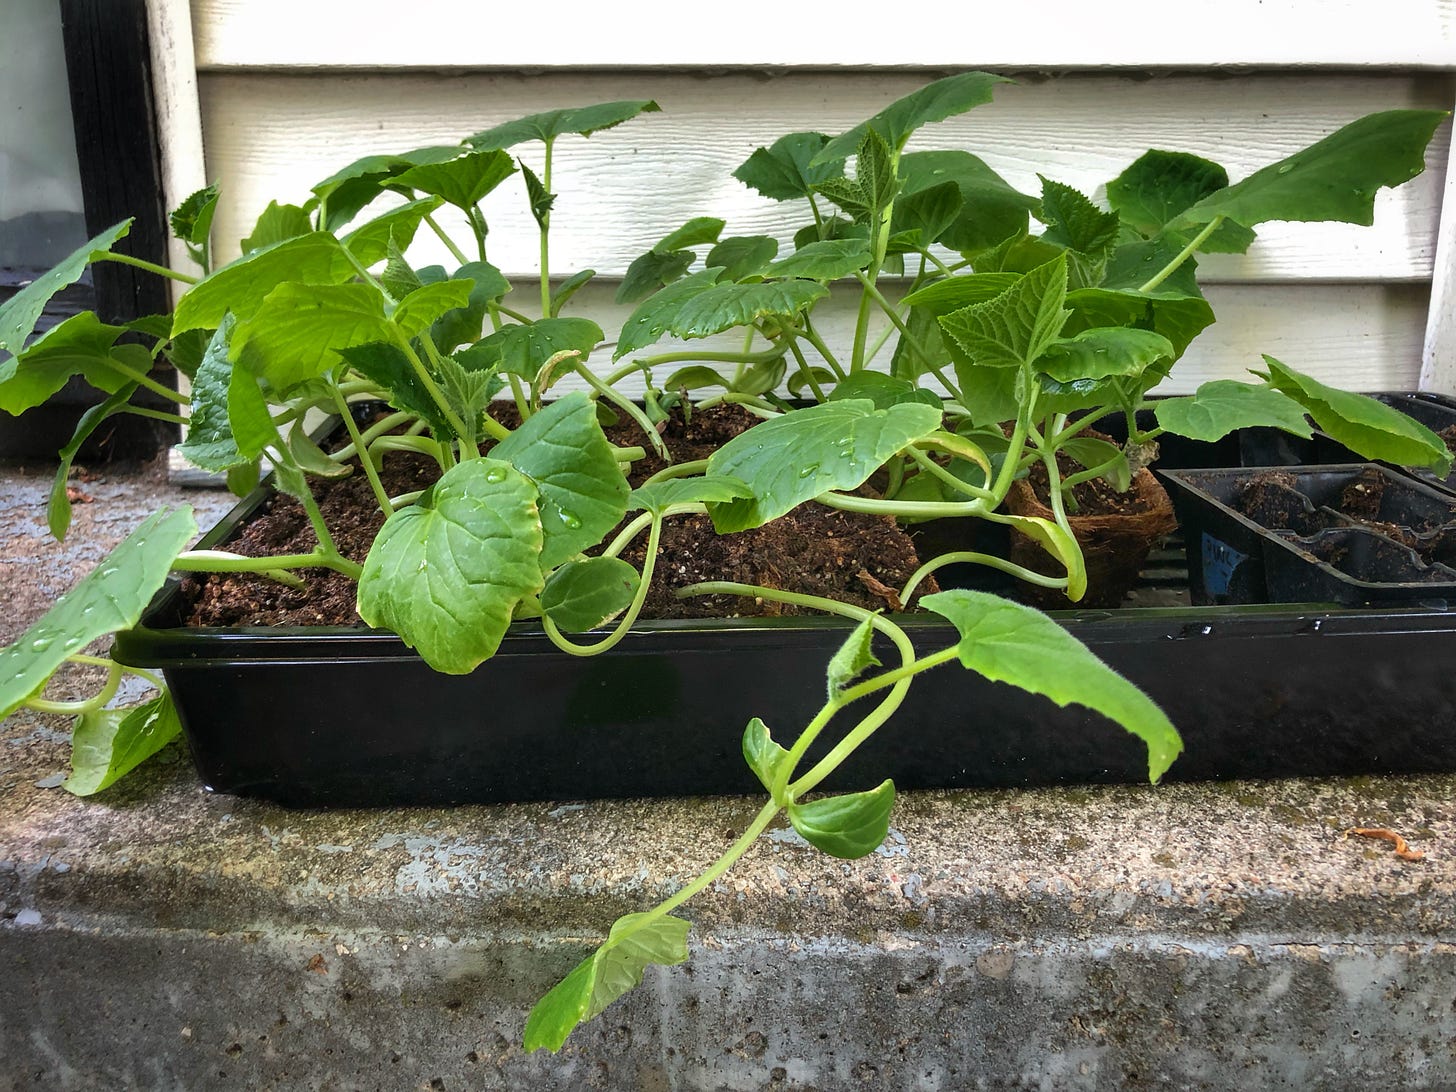 A tray of cucumber seedlings,set outside to harden off. There is some water on their leaves.